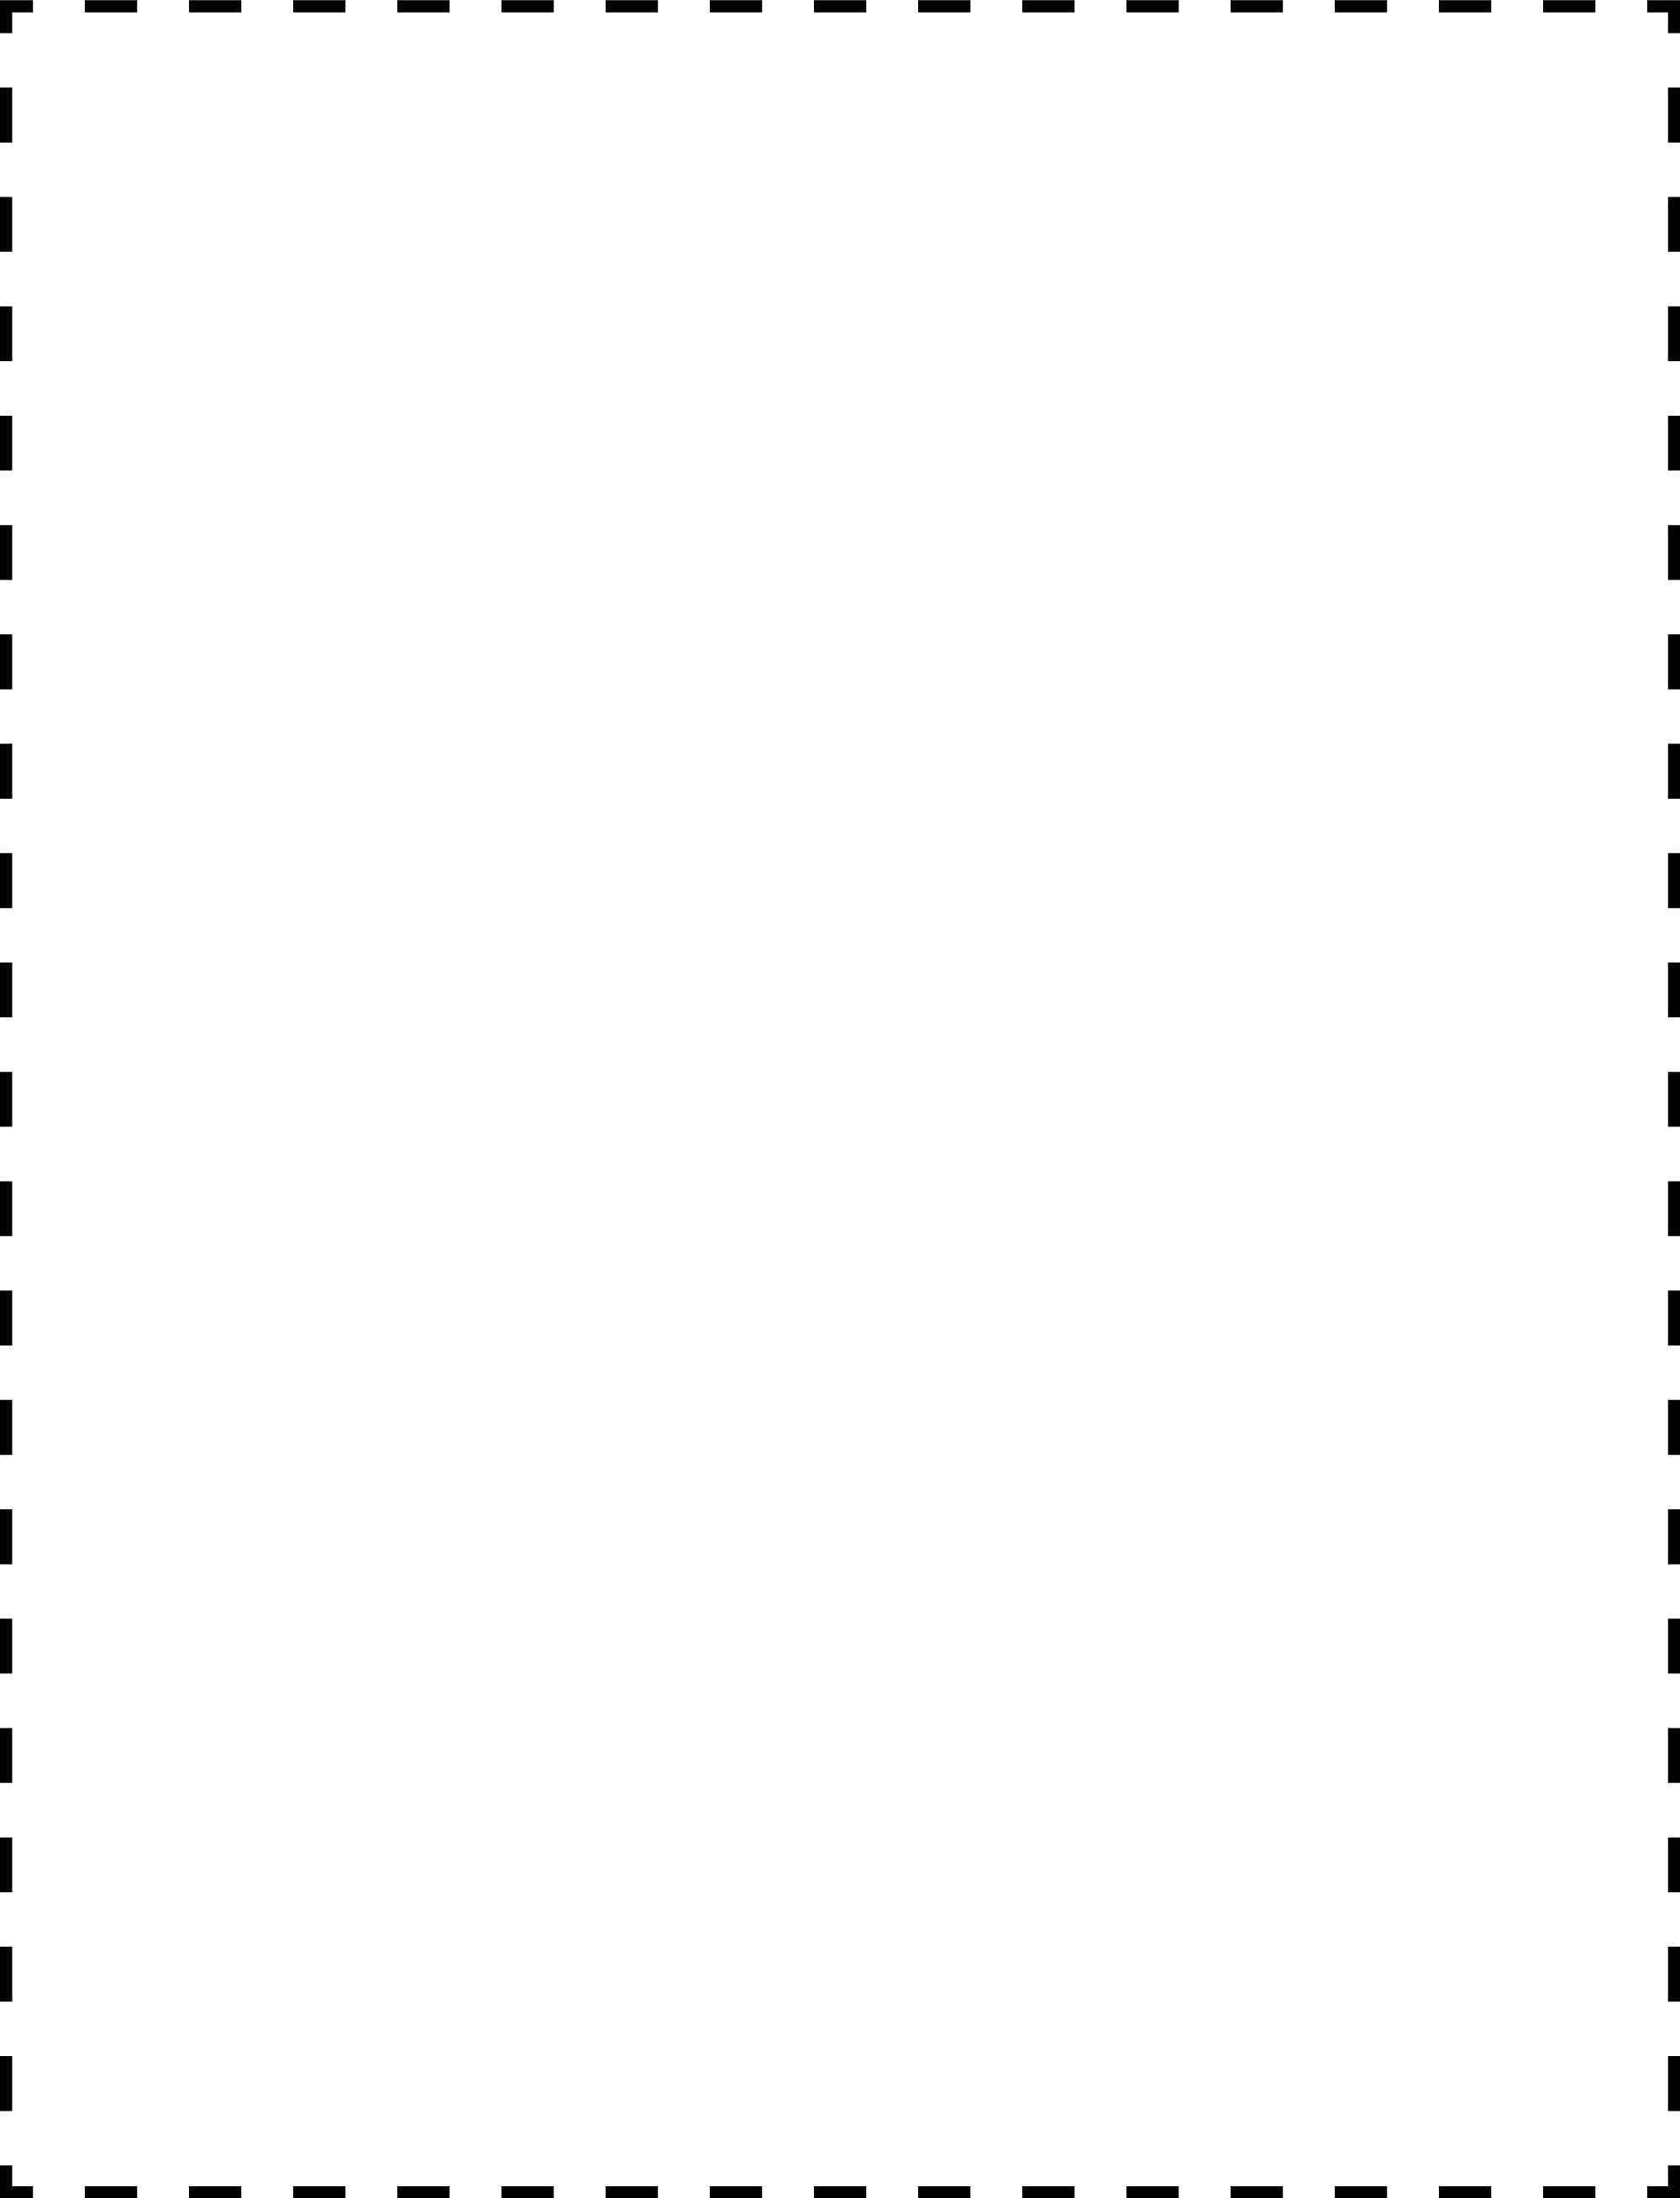 625-2340-coupon-outline-4x5-k.png